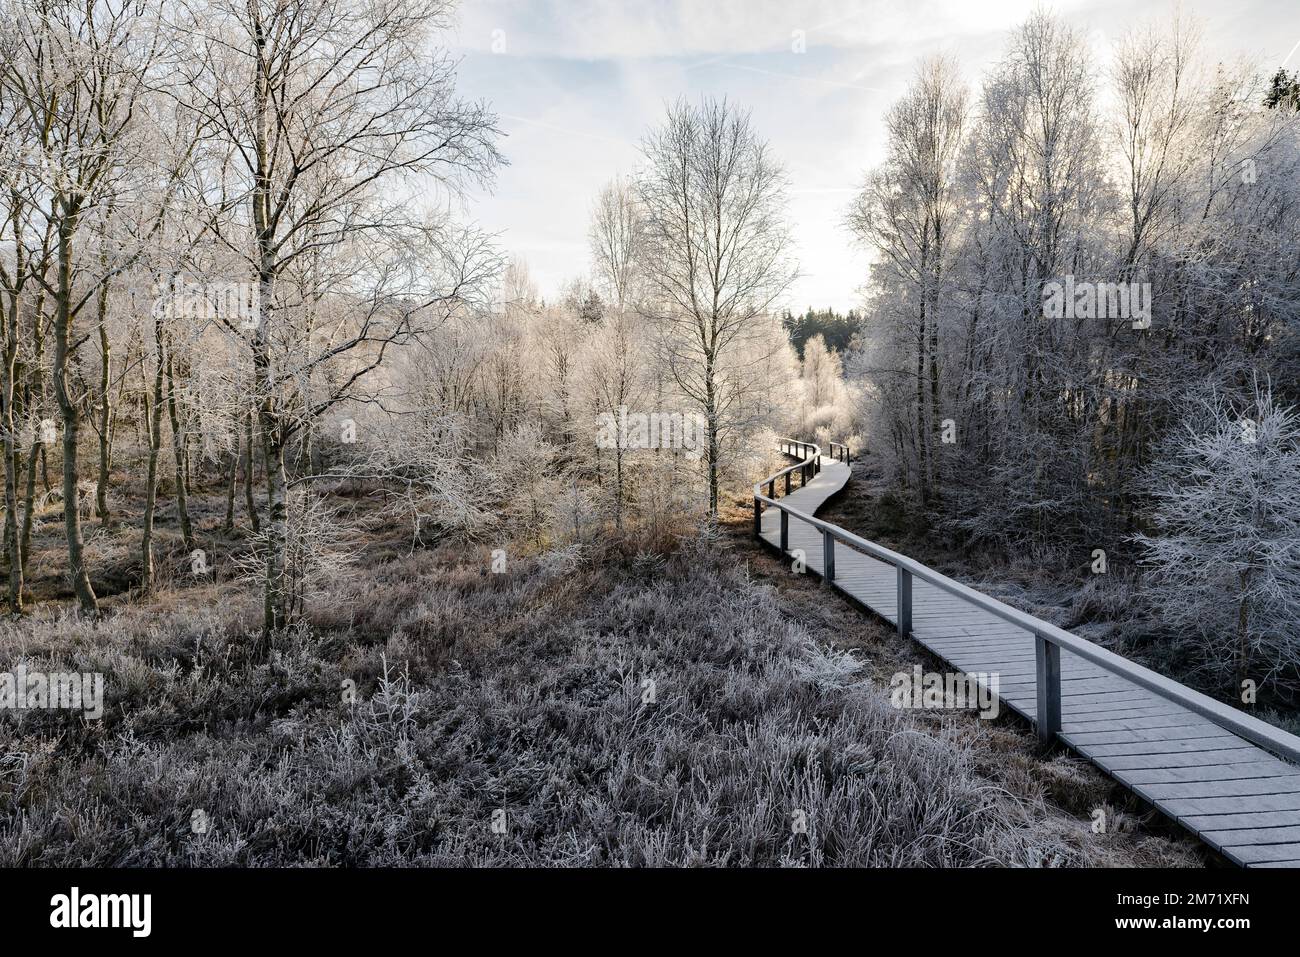 Frosty winter landscape with the low winter sun shining over the wooden plank path above the Mecklenbruch raised bog, Solling-Vogler, Germany Stock Photo